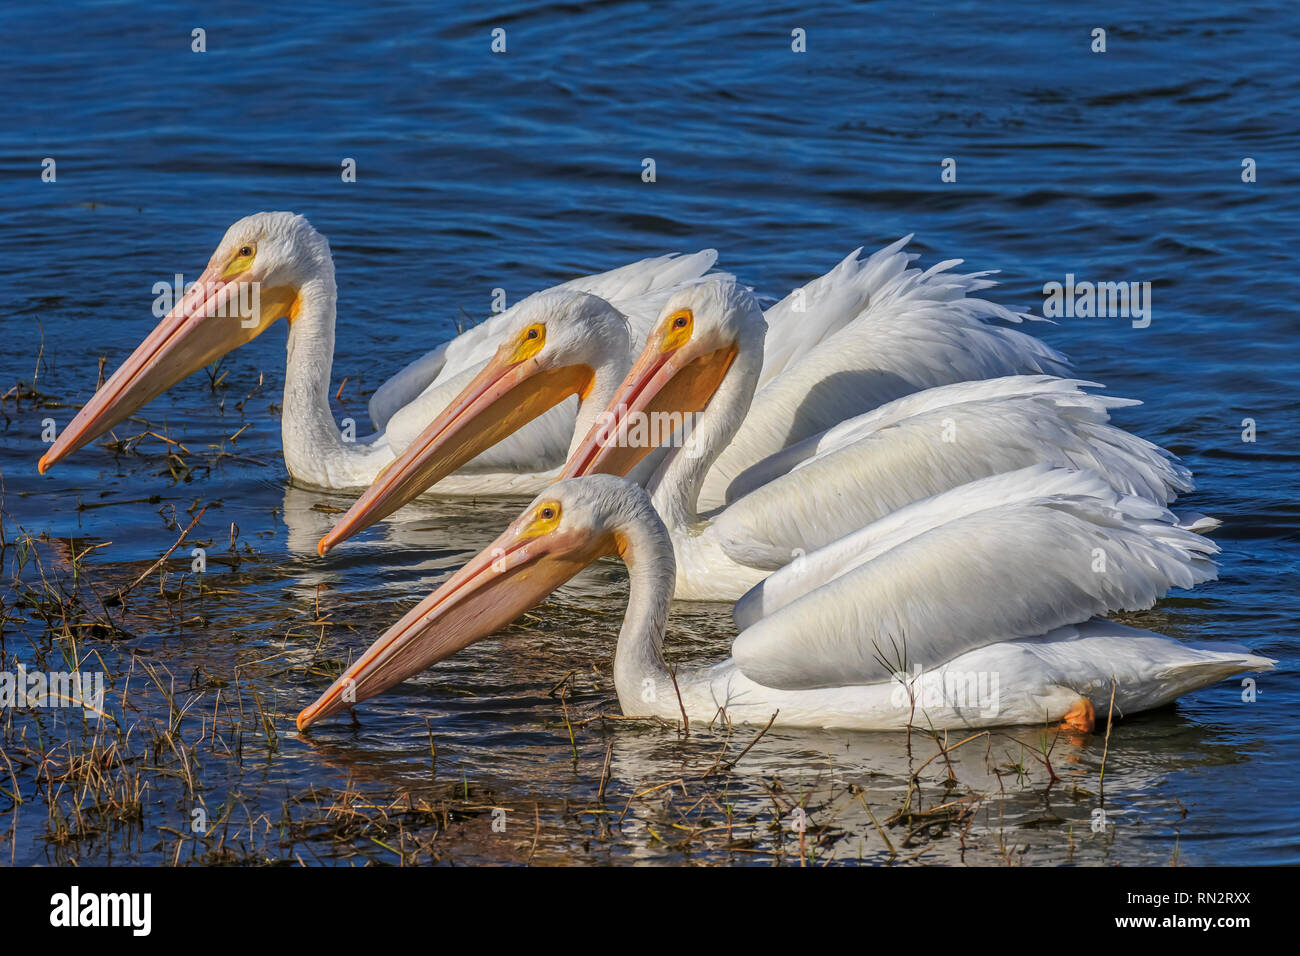 A group of American white pelicans (Pelecanus erythrorhynchos)  a large aquatic soaring bird floating together in a lake Stock Photo